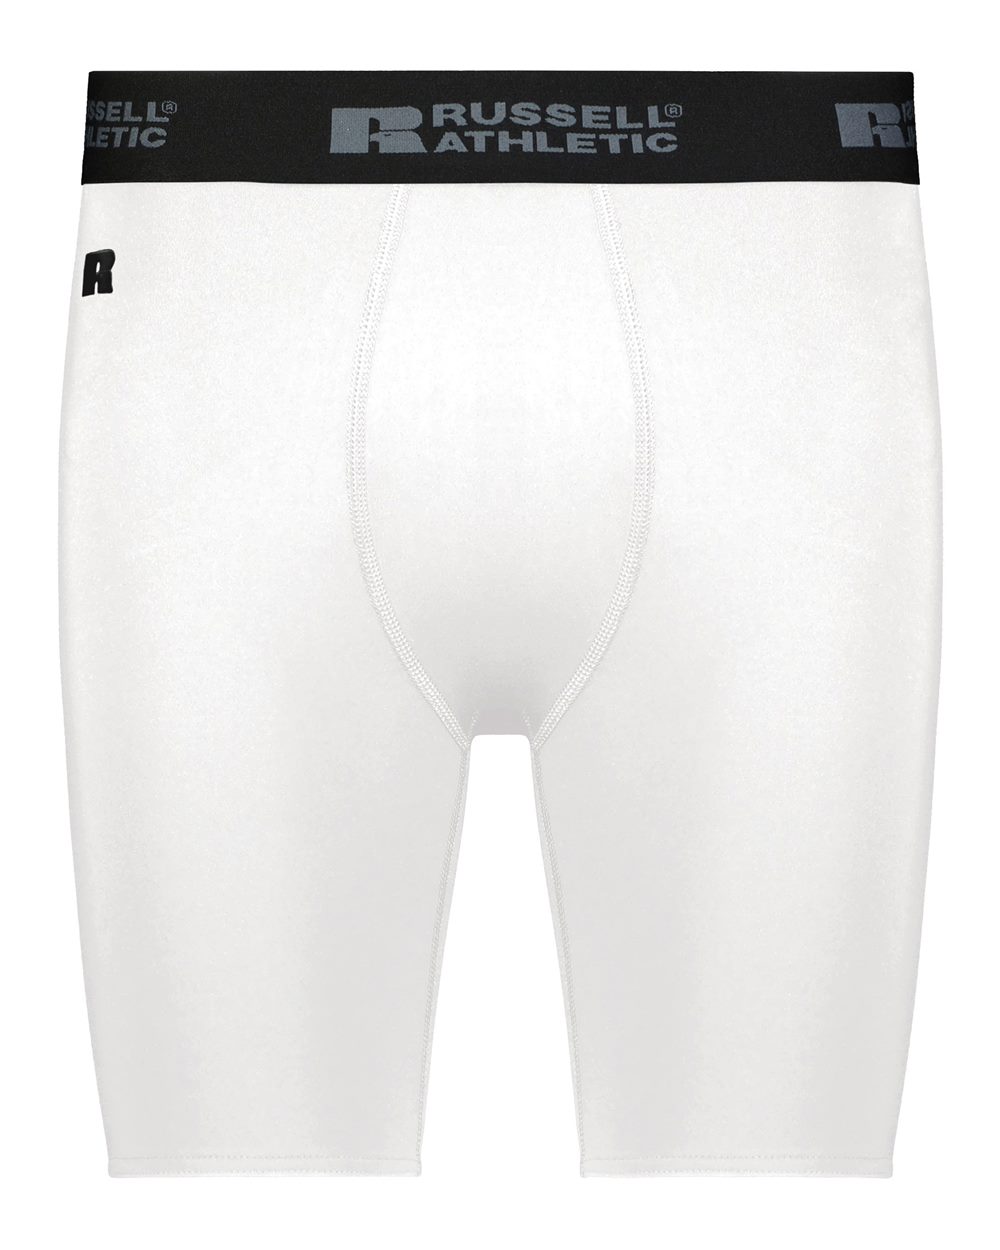 Russell Athletic - CoolCore Compression Shorts, 84/16 polyester/spandex  elastane Xtreme compression cloth, Unleash Your Style with Our Trendy  Athletic shorts